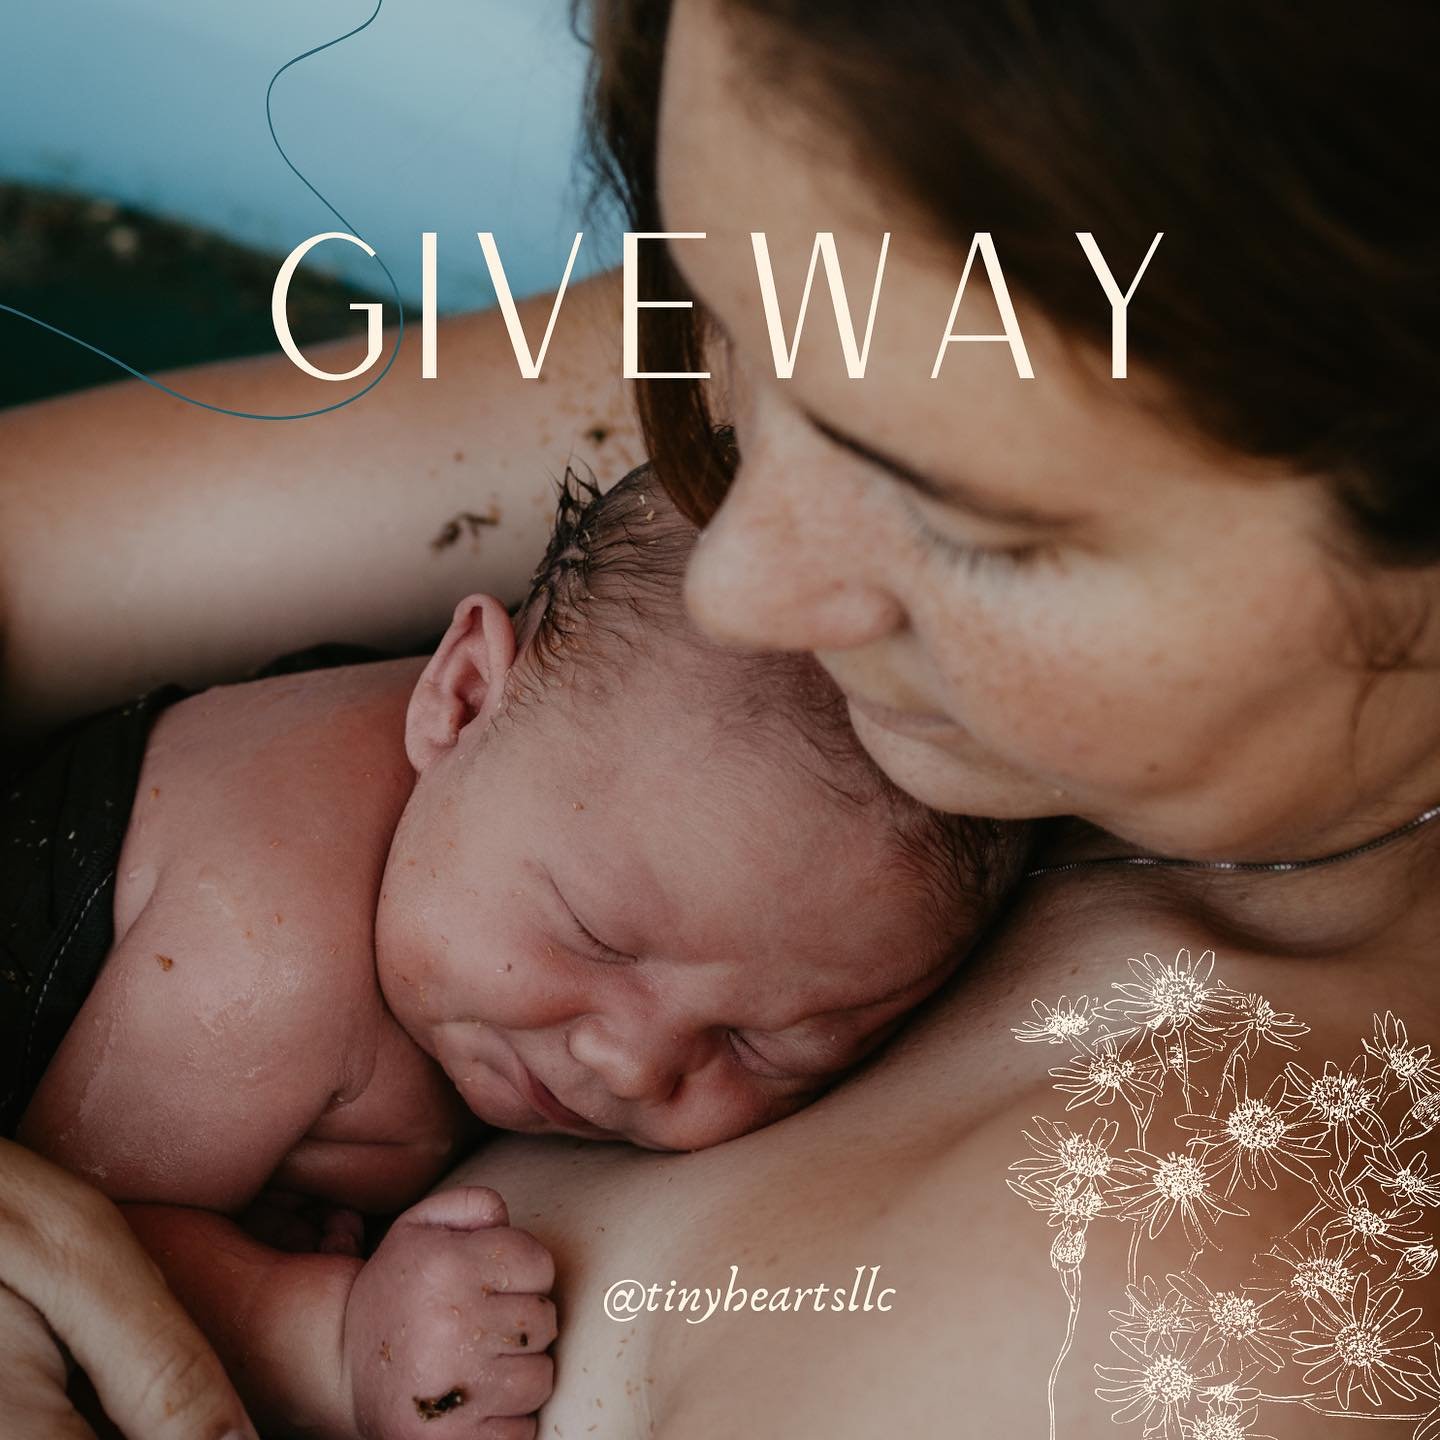 ✨GIVEWAY✨
My birthday is exactly in a week so I have decided to gift a memory and special experience to one of you!

Here are the details:
🌷your choice of a photography/doula experience - maternity, fresh 48 or herbal bath
🌷 1 hour with me to creat